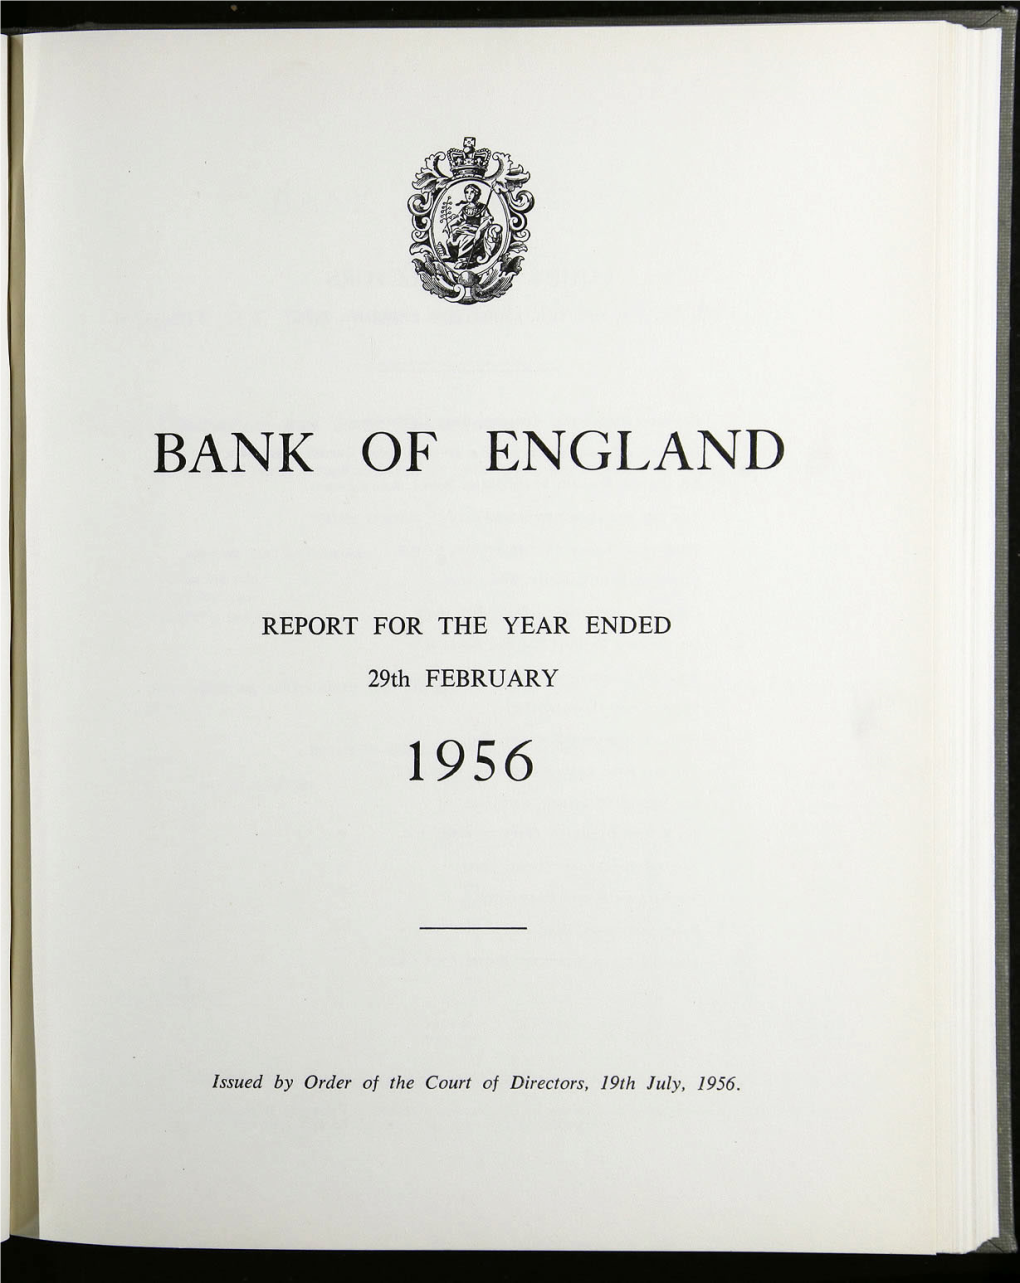 Annual Report and Accounts 1956